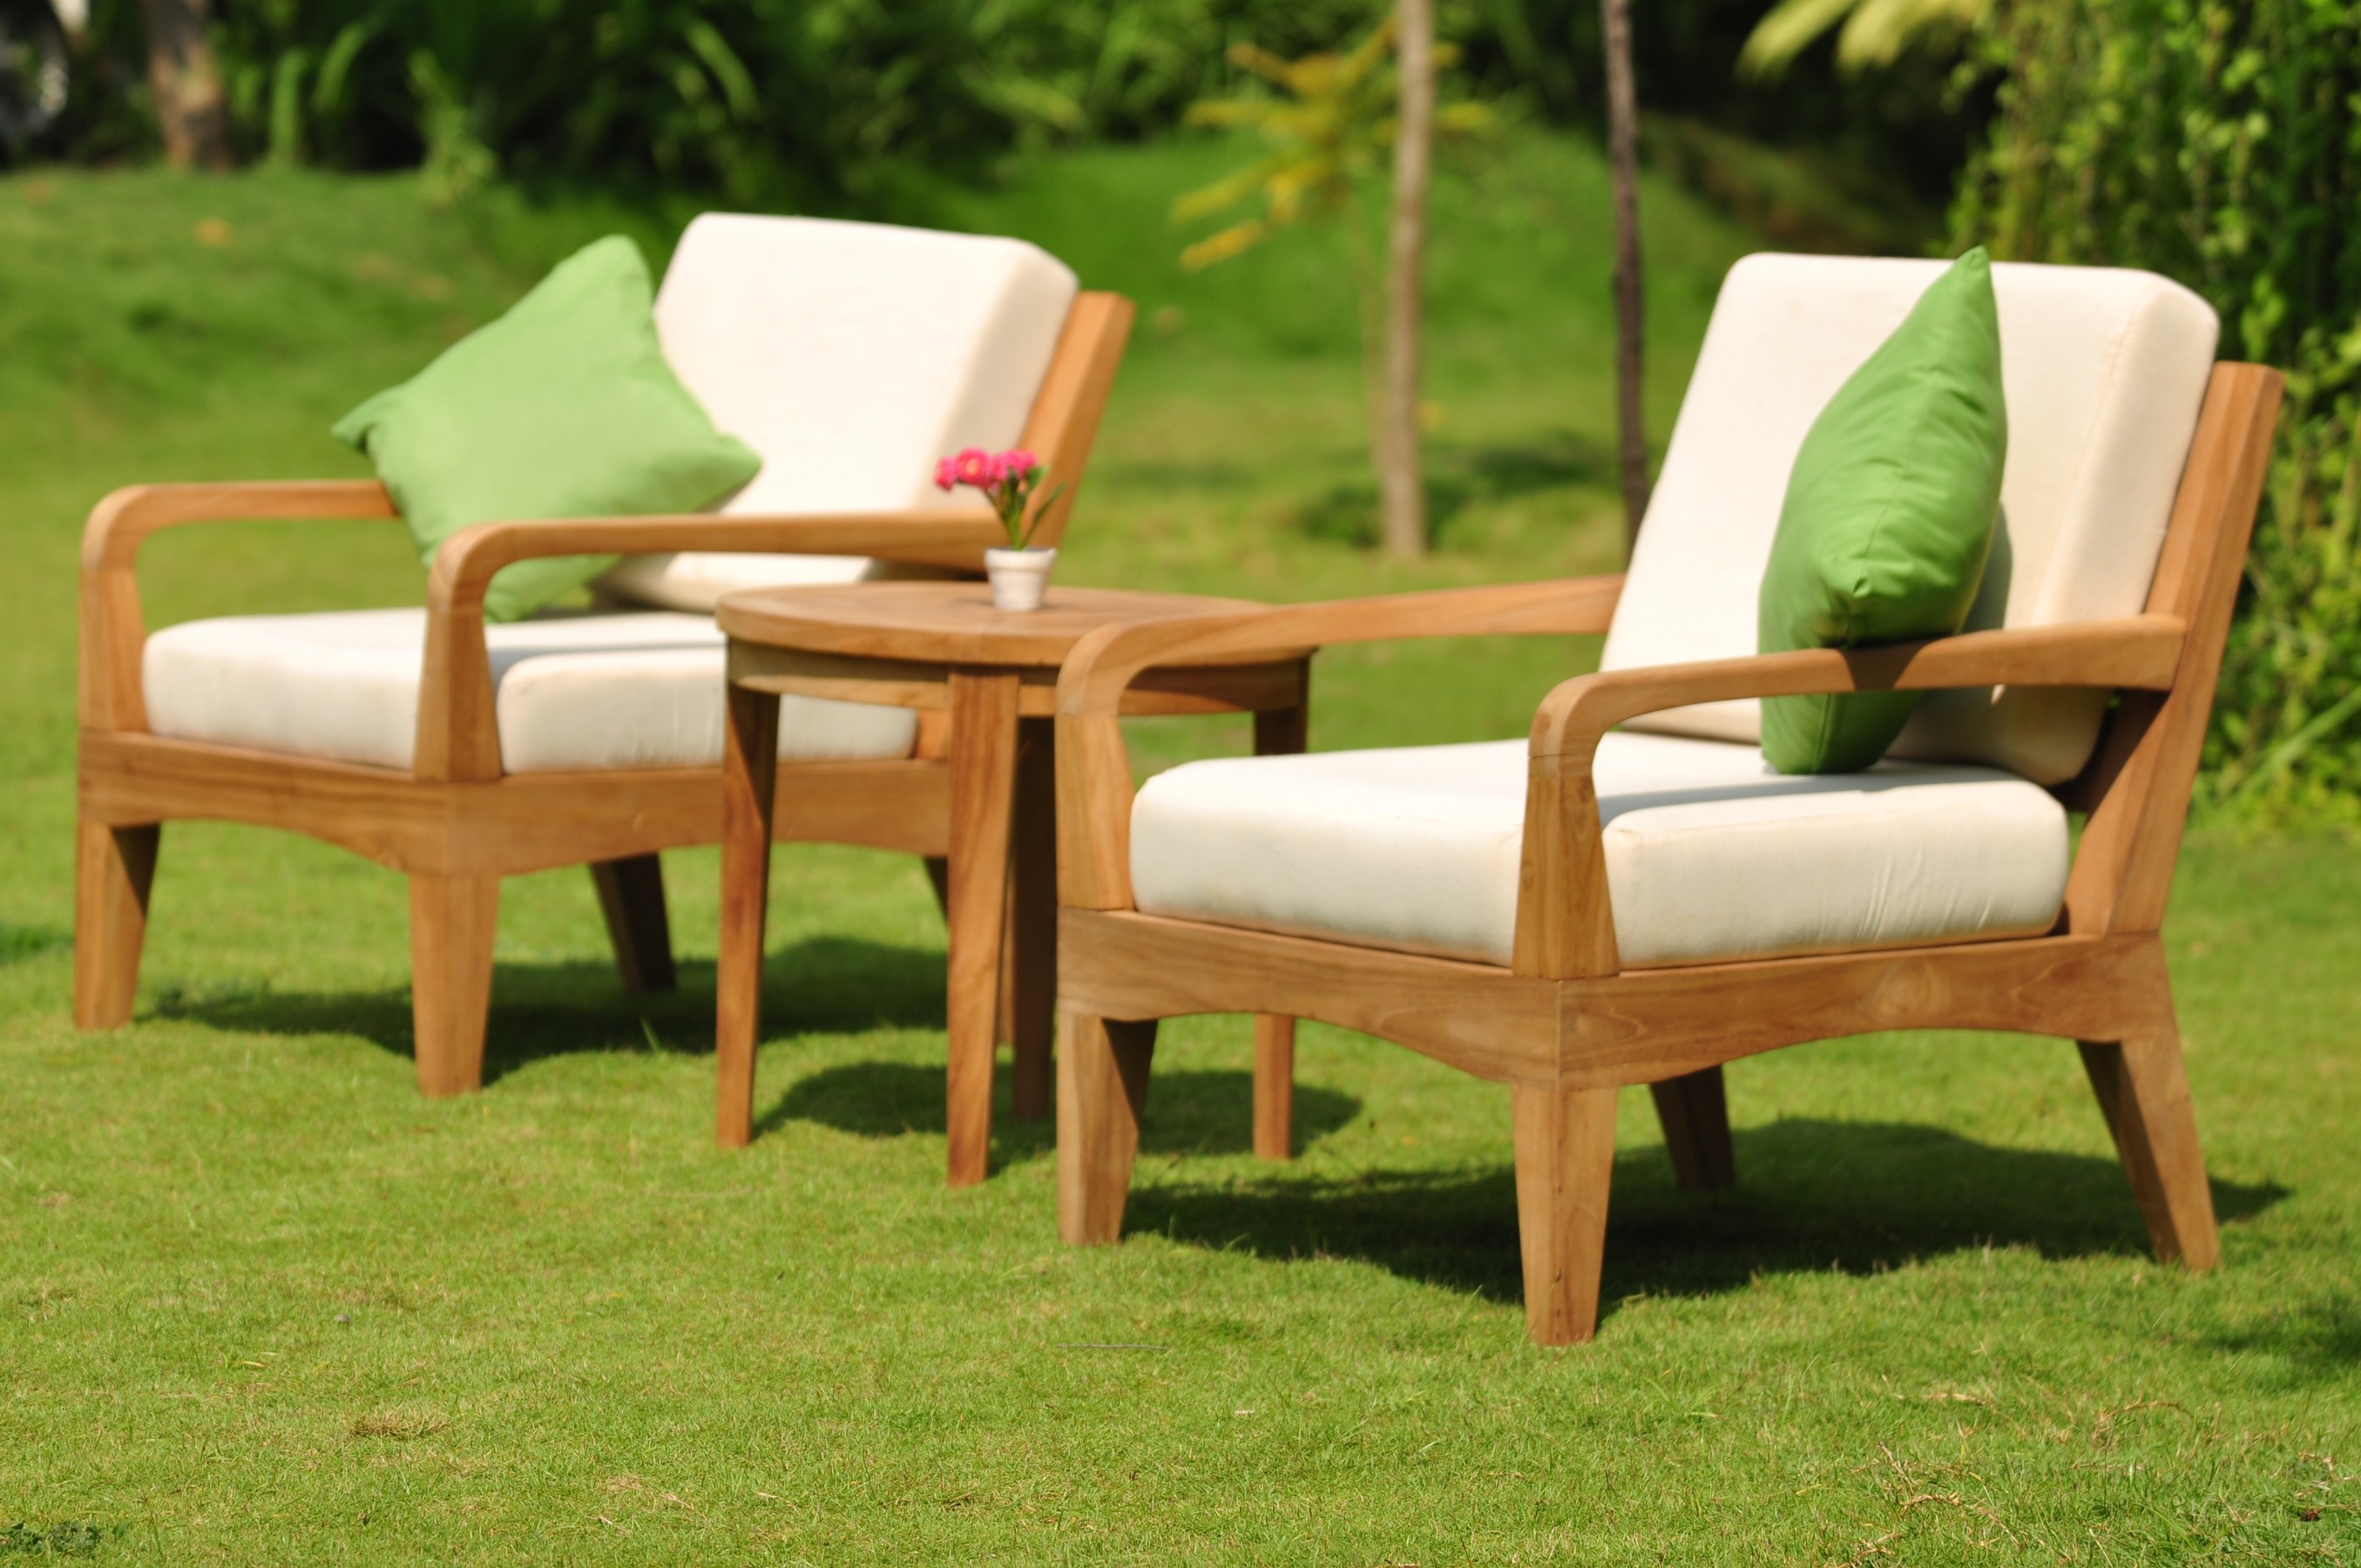 WholesaleTeak Outdoor Patio Grade-A Teak Wood 3 Piece Teak Sofa Lounge Chair Set - 2 Lounge Chairs And 1 Round End Table - Furniture only - Noida COLLECTION #WMSSNO3 - image 2 of 2